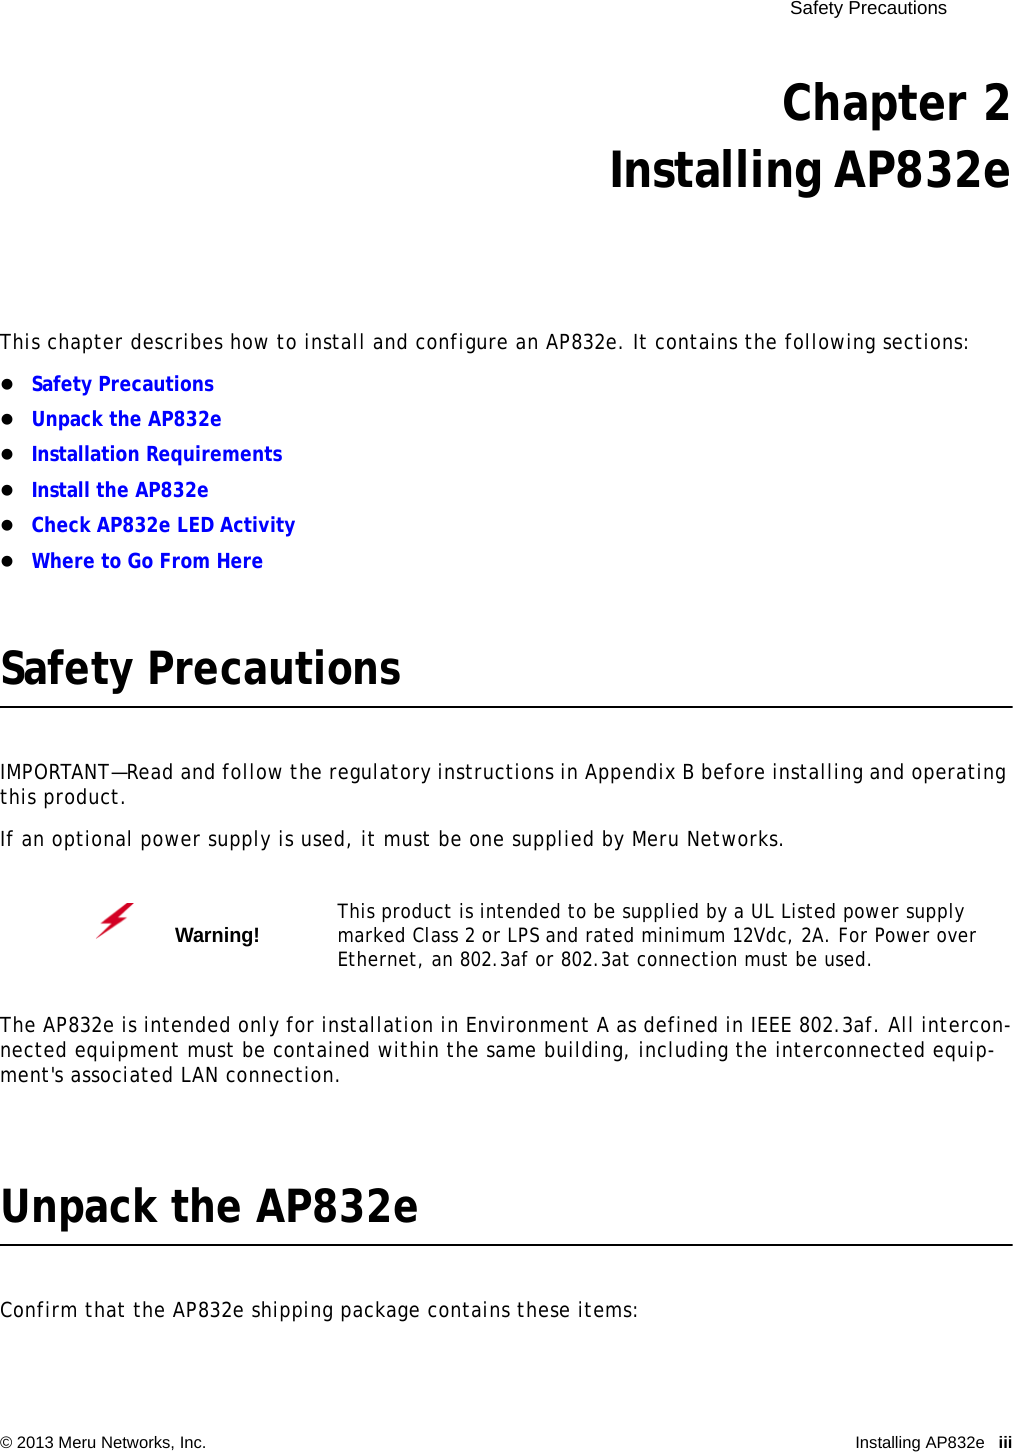  Safety Precautions © 2013 Meru Networks, Inc. Installing AP832e iii Chapter 2Installing AP832eThis chapter describes how to install and configure an AP832e. It contains the following sections:Safety PrecautionsUnpack the AP832eInstallation RequirementsInstall the AP832eCheck AP832e LED ActivityWhere to Go From HereSafety PrecautionsIMPORTANT—Read and follow the regulatory instructions in Appendix B before installing and operating this product.If an optional power supply is used, it must be one supplied by Meru Networks.The AP832e is intended only for installation in Environment A as defined in IEEE 802.3af. All intercon-nected equipment must be contained within the same building, including the interconnected equip-ment&apos;s associated LAN connection.Unpack the AP832eConfirm that the AP832e shipping package contains these items:Warning!   This product is intended to be supplied by a UL Listed power supply marked Class 2 or LPS and rated minimum 12Vdc, 2A. For Power over Ethernet, an 802.3af or 802.3at connection must be used.